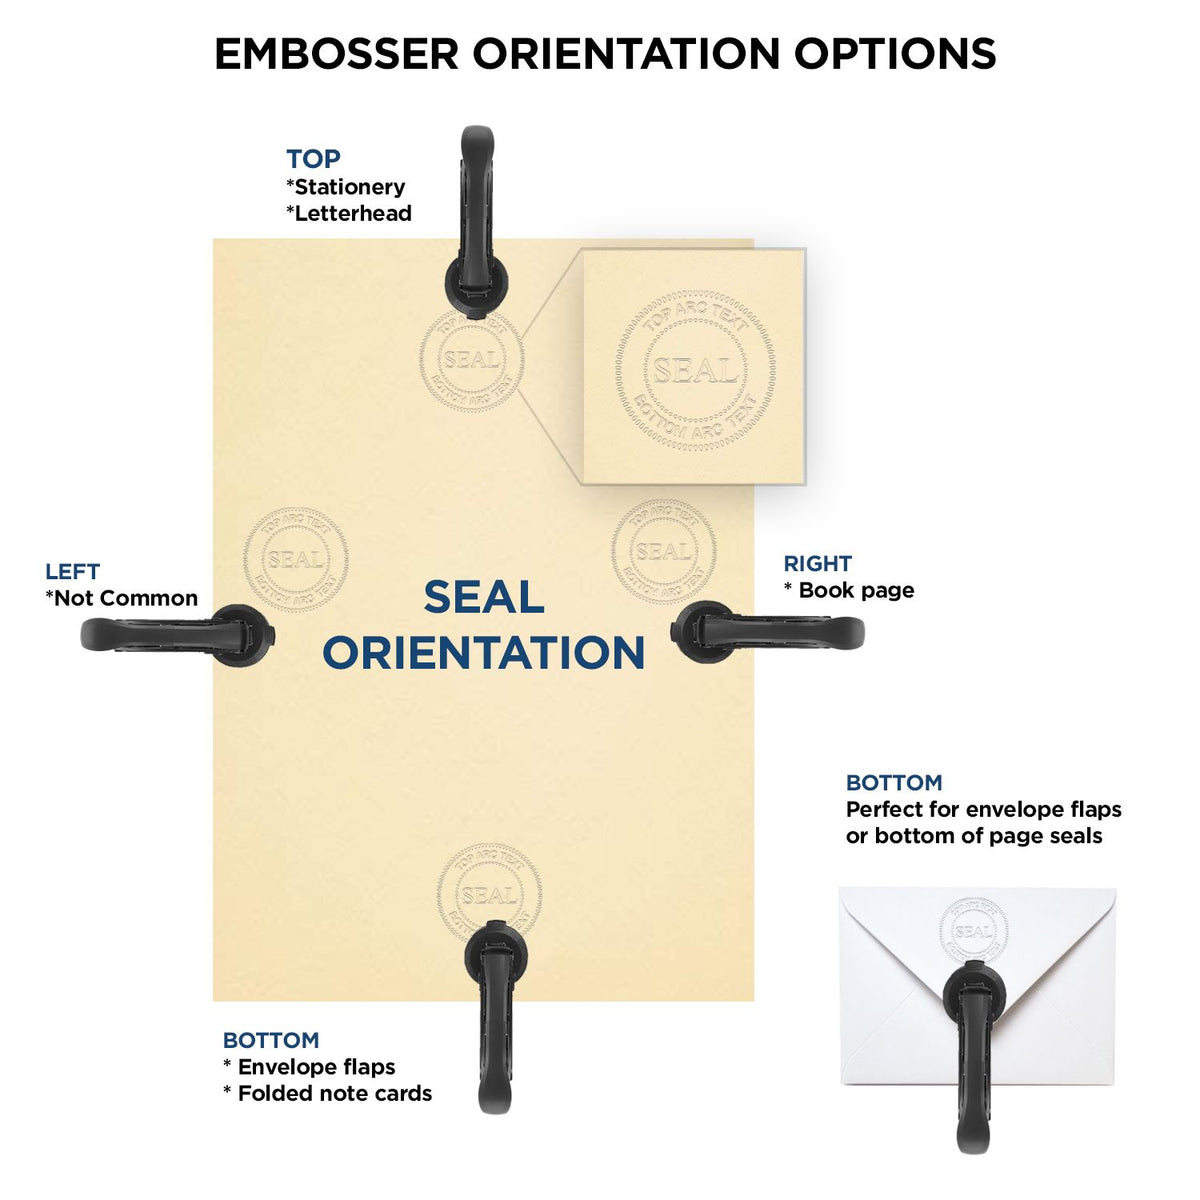 An infographic for the Handheld Mississippi Land Surveyor Seal showing embosser orientation, this is showing examples of a top, bottom, right and left insert.